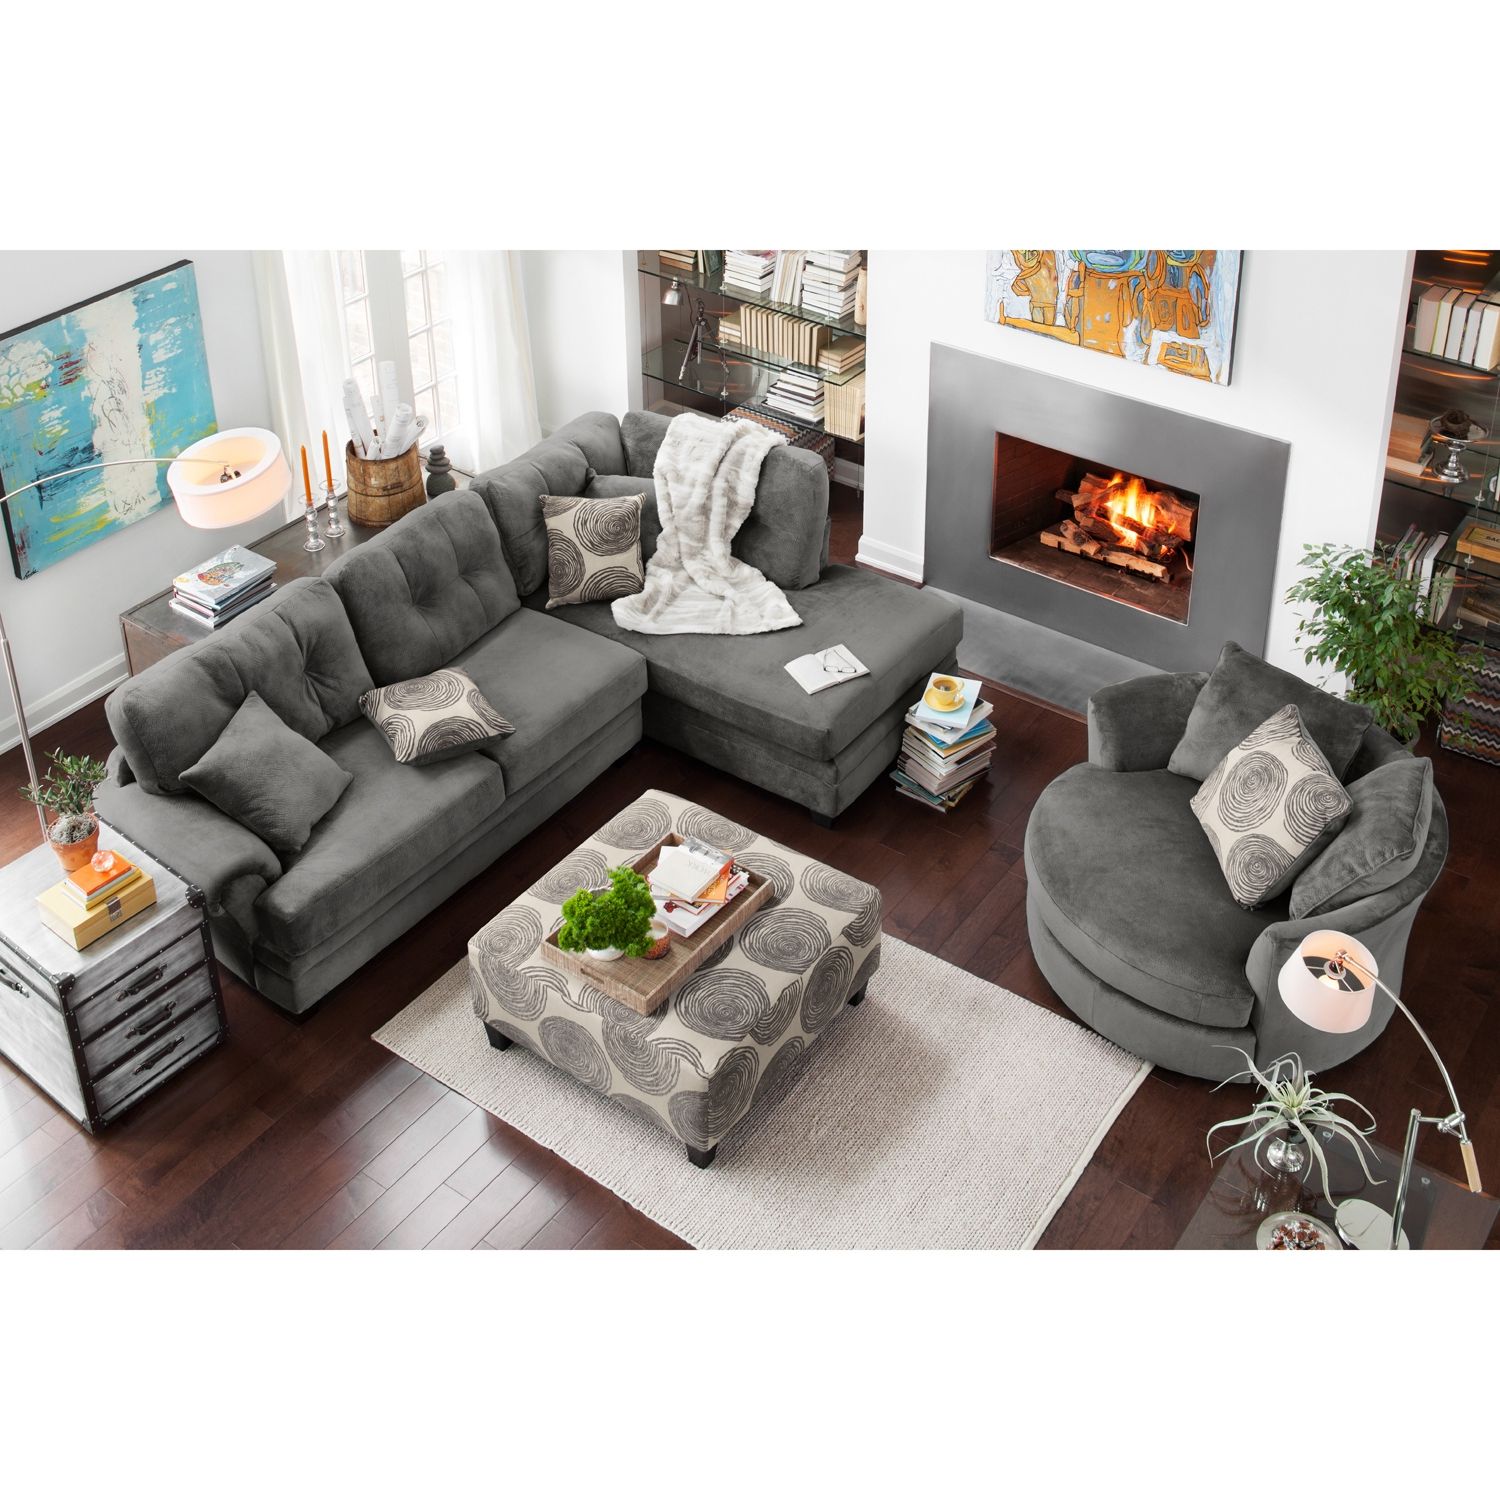 Favorite Tenny Cognac 2 Piece Right Facing Chaise Sectionals With 2 Headrest Regarding Left Facing Sectional Sofa Leather Arm Truscotti Stock Rooms Gray (View 10 of 20)